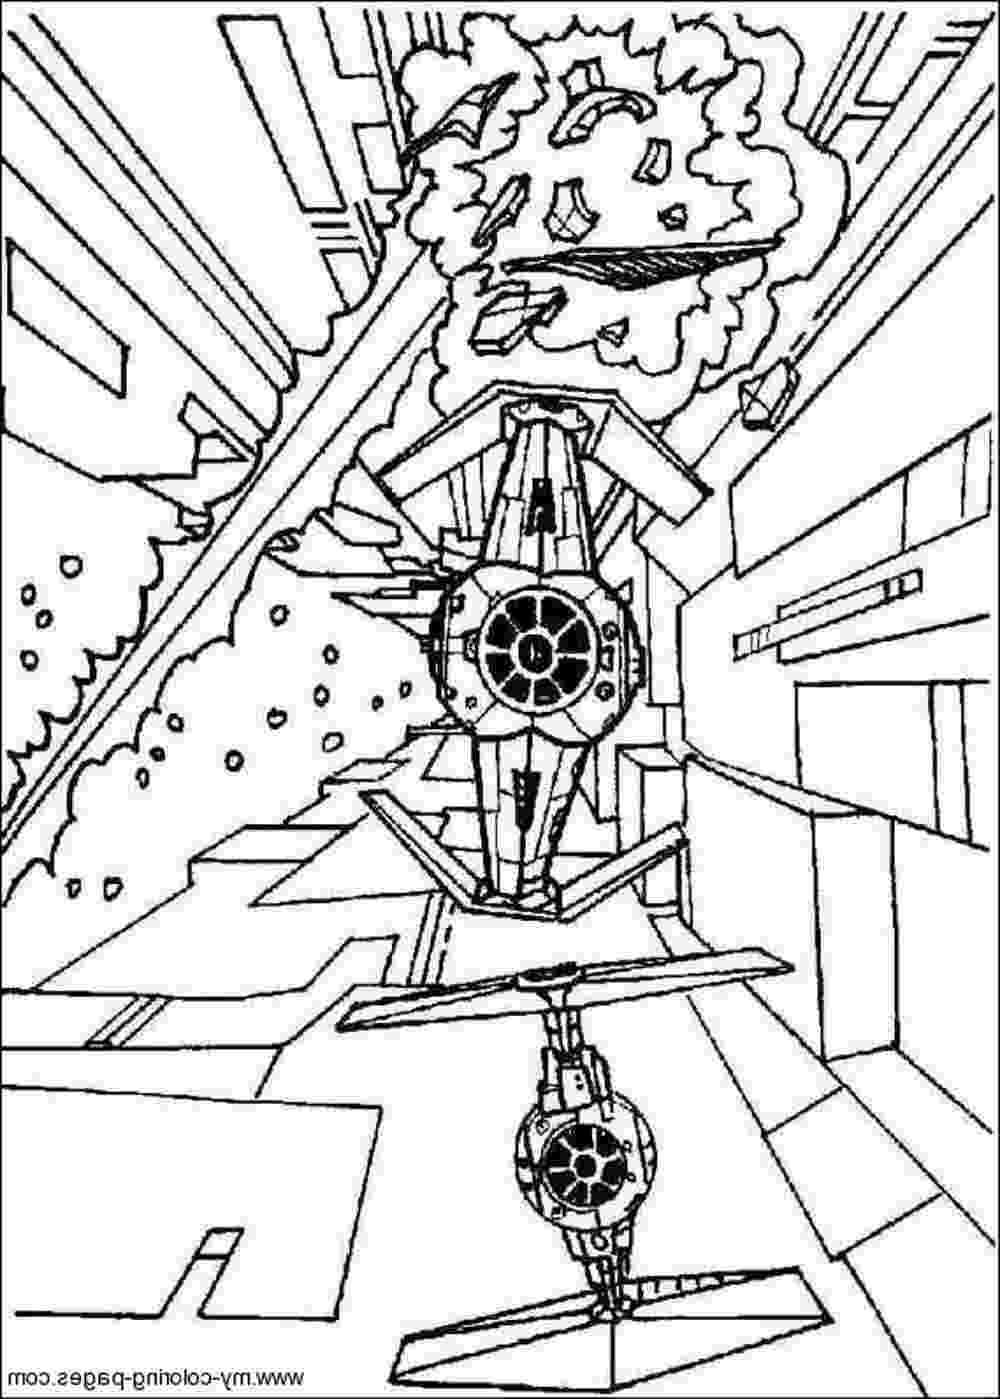 lego star wars coloring pictures lego star wars coloring pages free bestappsforkidscom pictures star coloring lego wars 